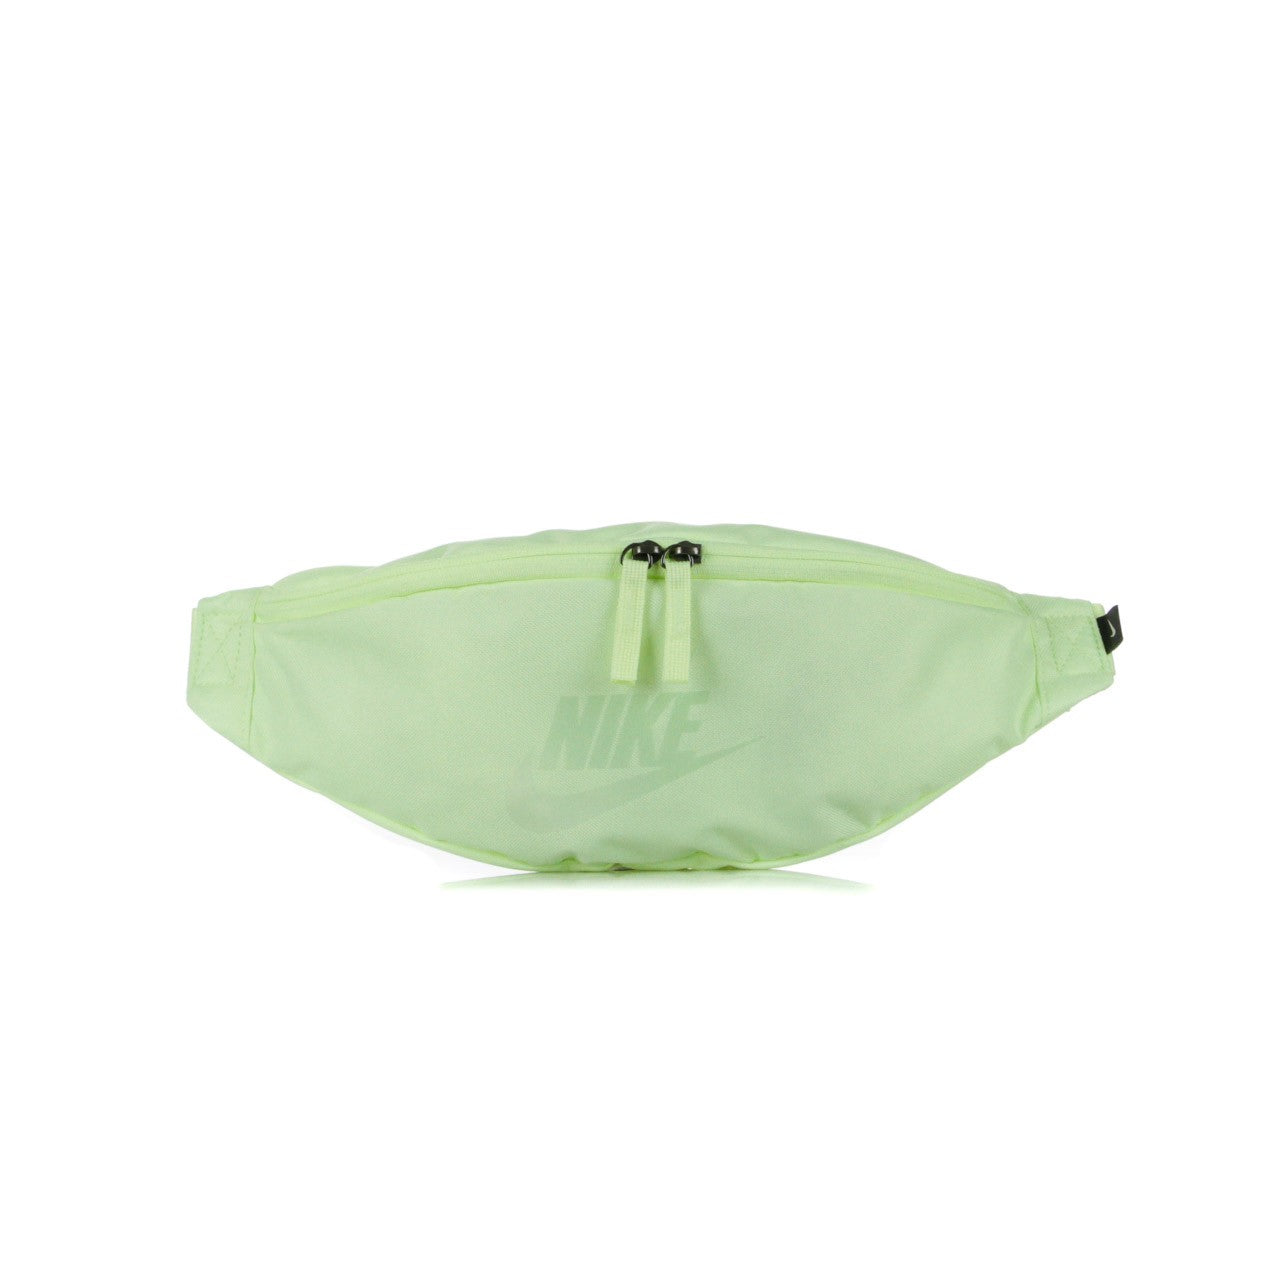 Marsupio Uomo Heritage Hip Pack Barely Volt/barely Volt/clear BA5750